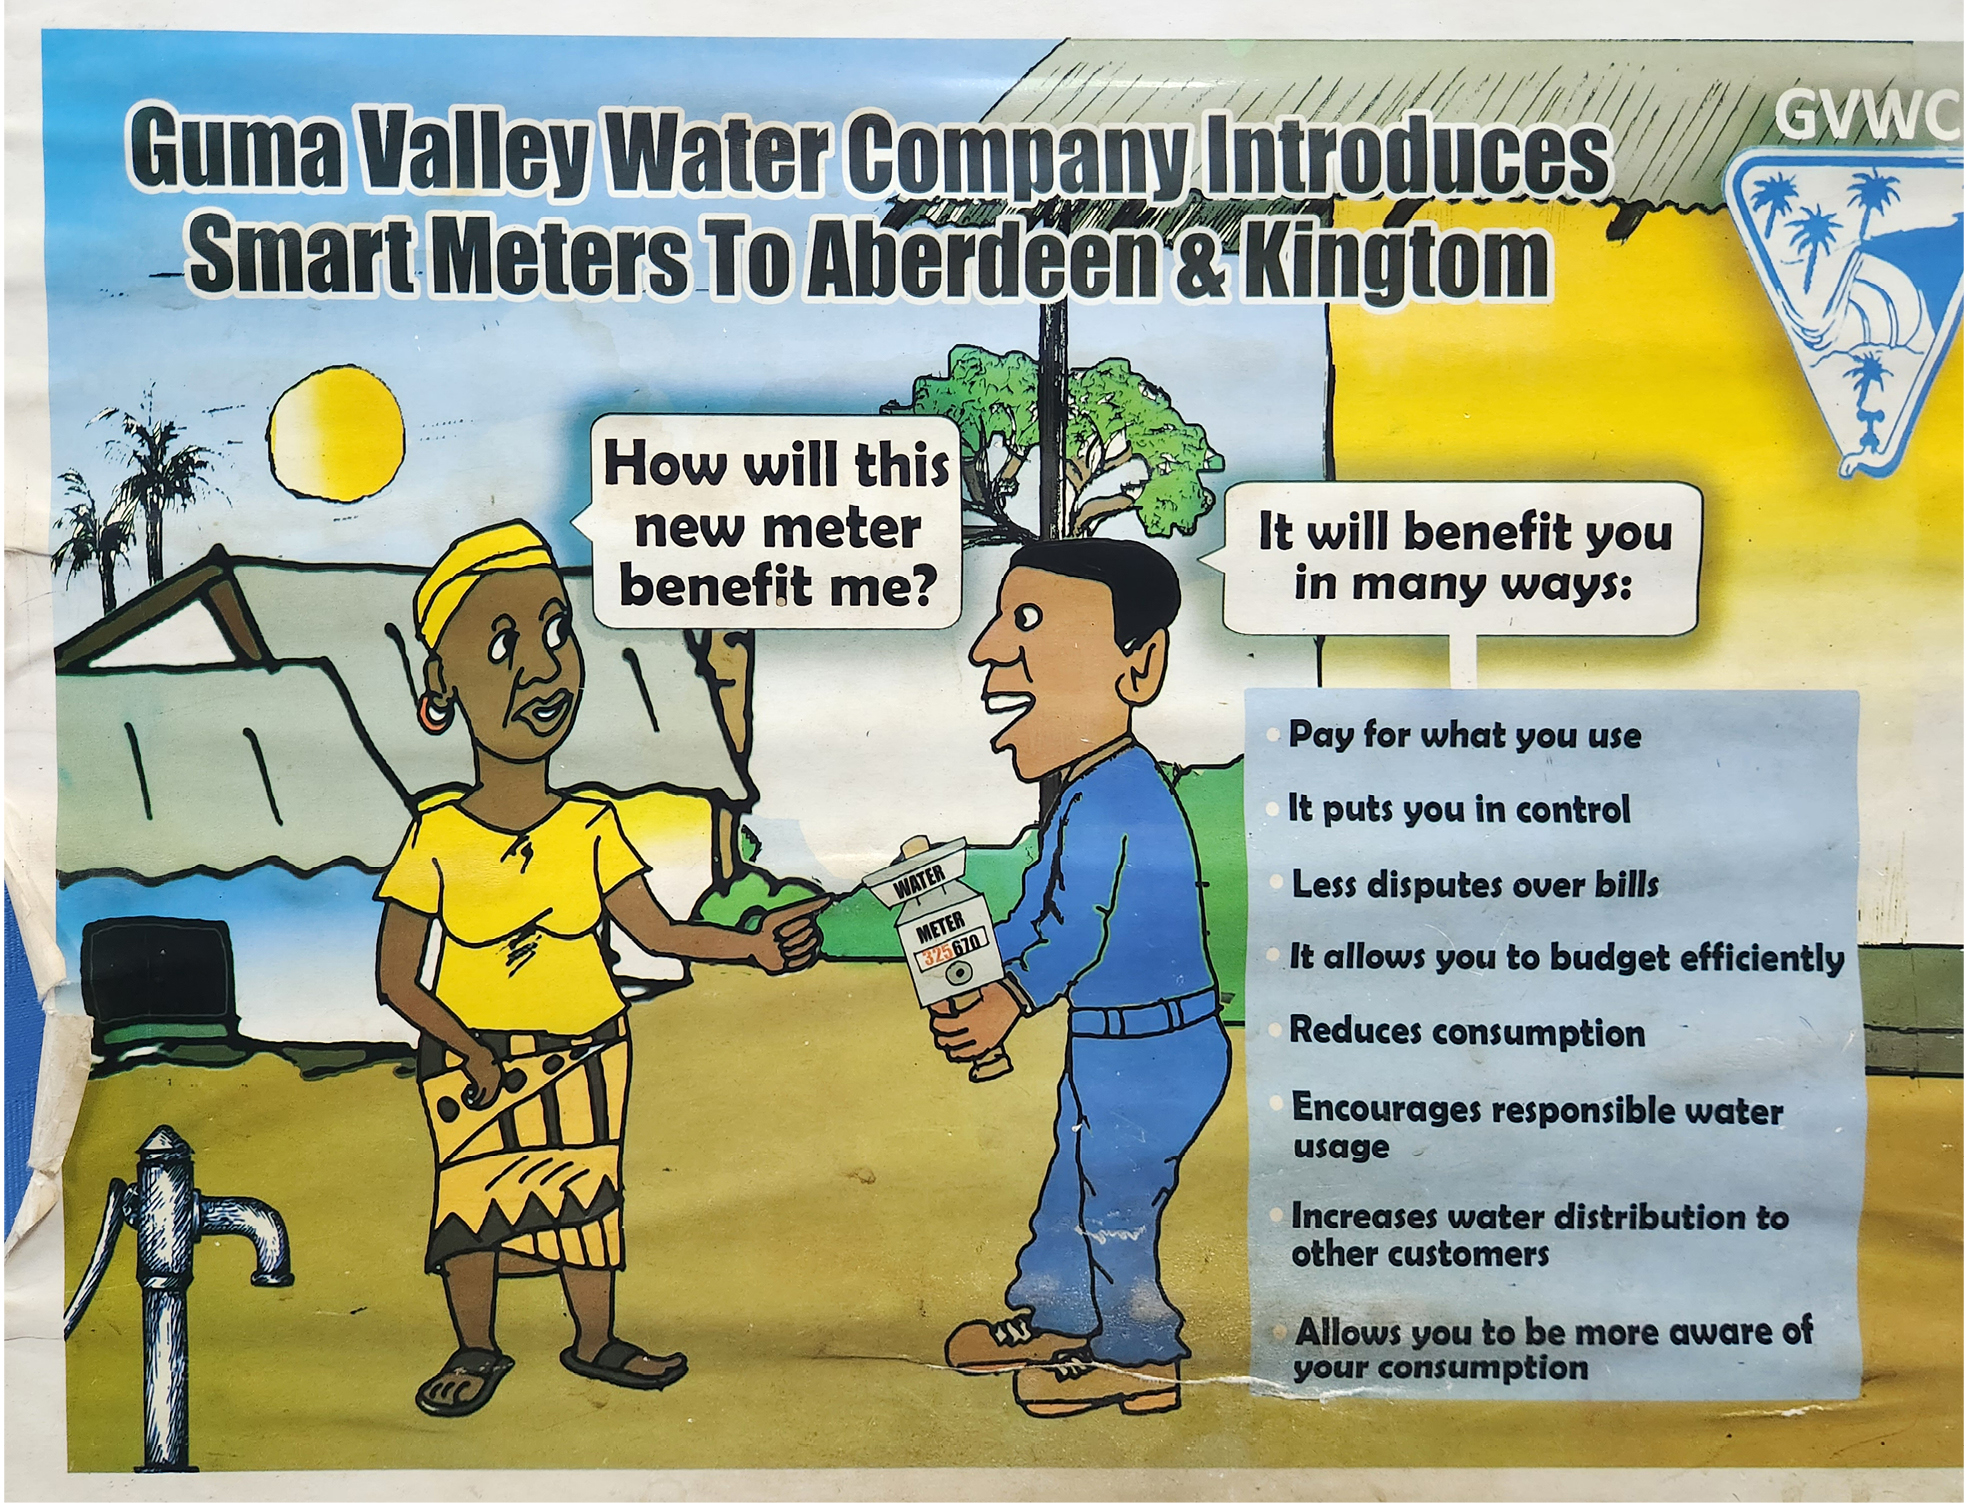 Illustrations were used to communicate benefits of smart meters. This cartoon features two characters, a customer and a member of the utility, discussing a list of benefits.